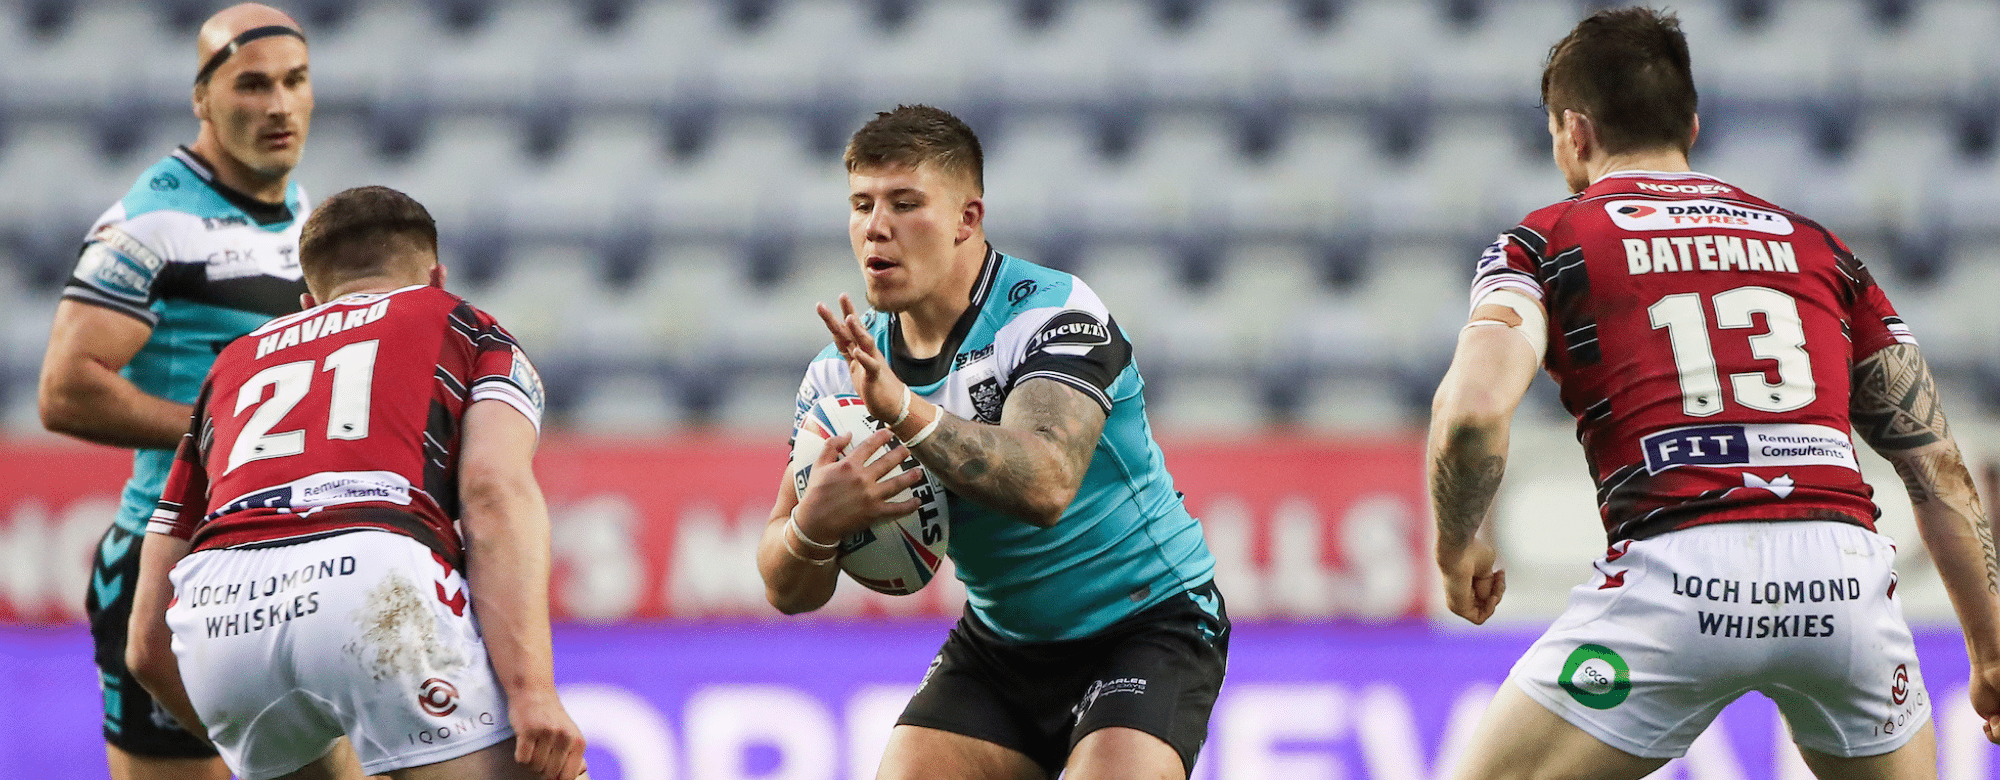 Cator “Gutted” But Takes Positives From Wigan Defeat